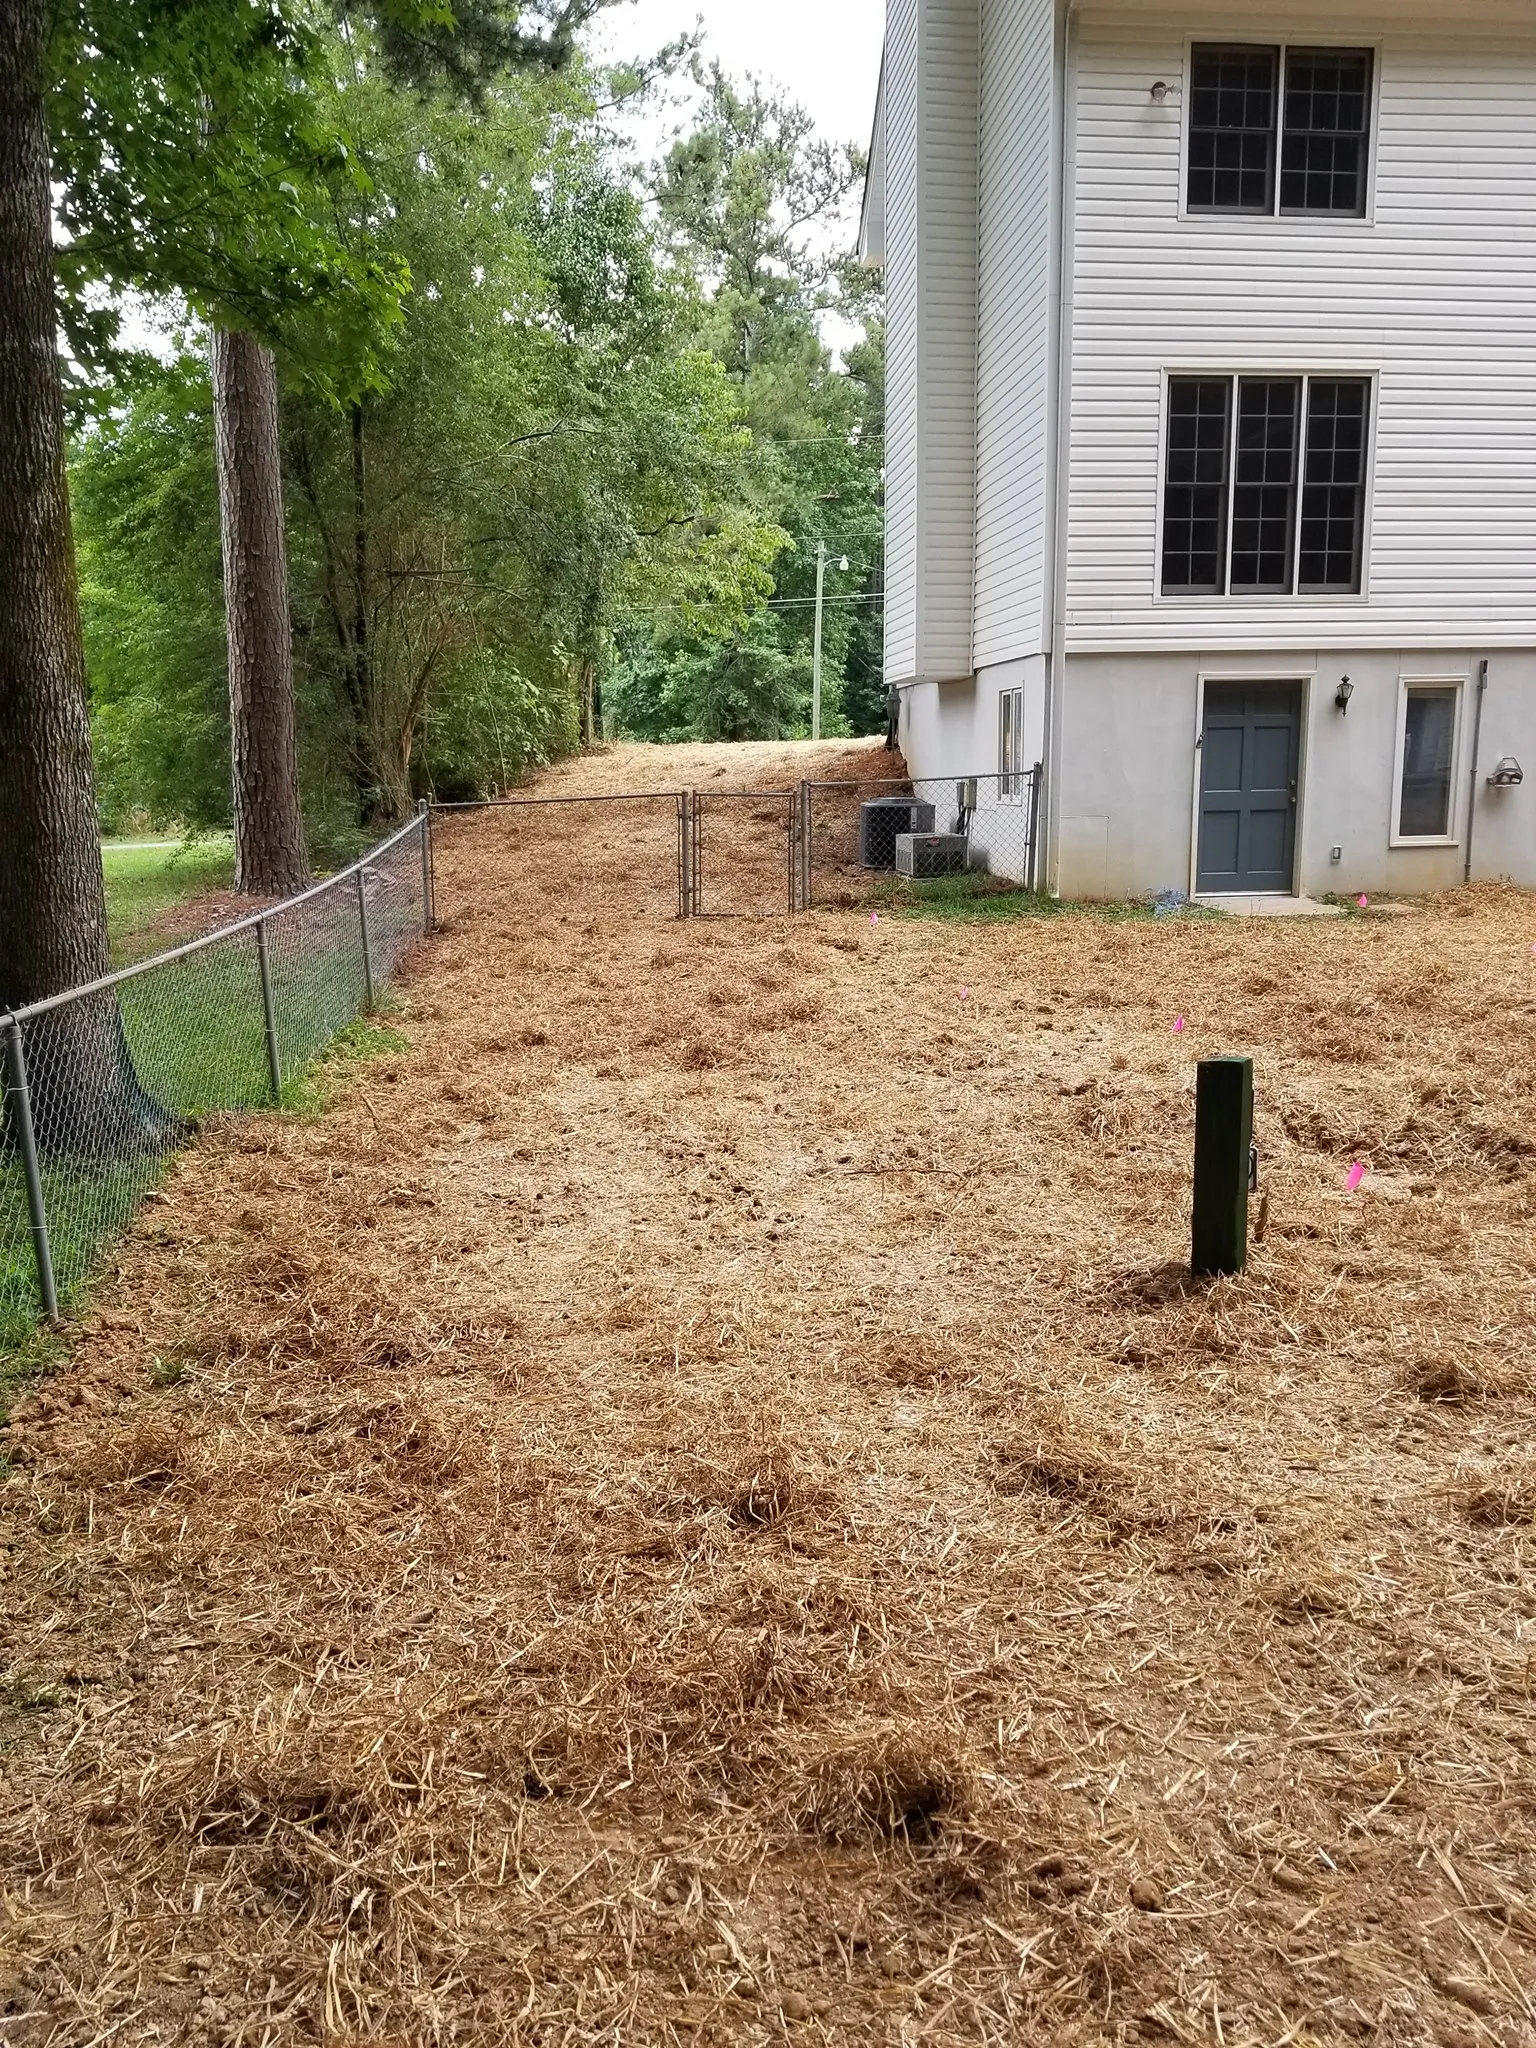 New Septic for Septic & Sewer Solutions in Buford, GA